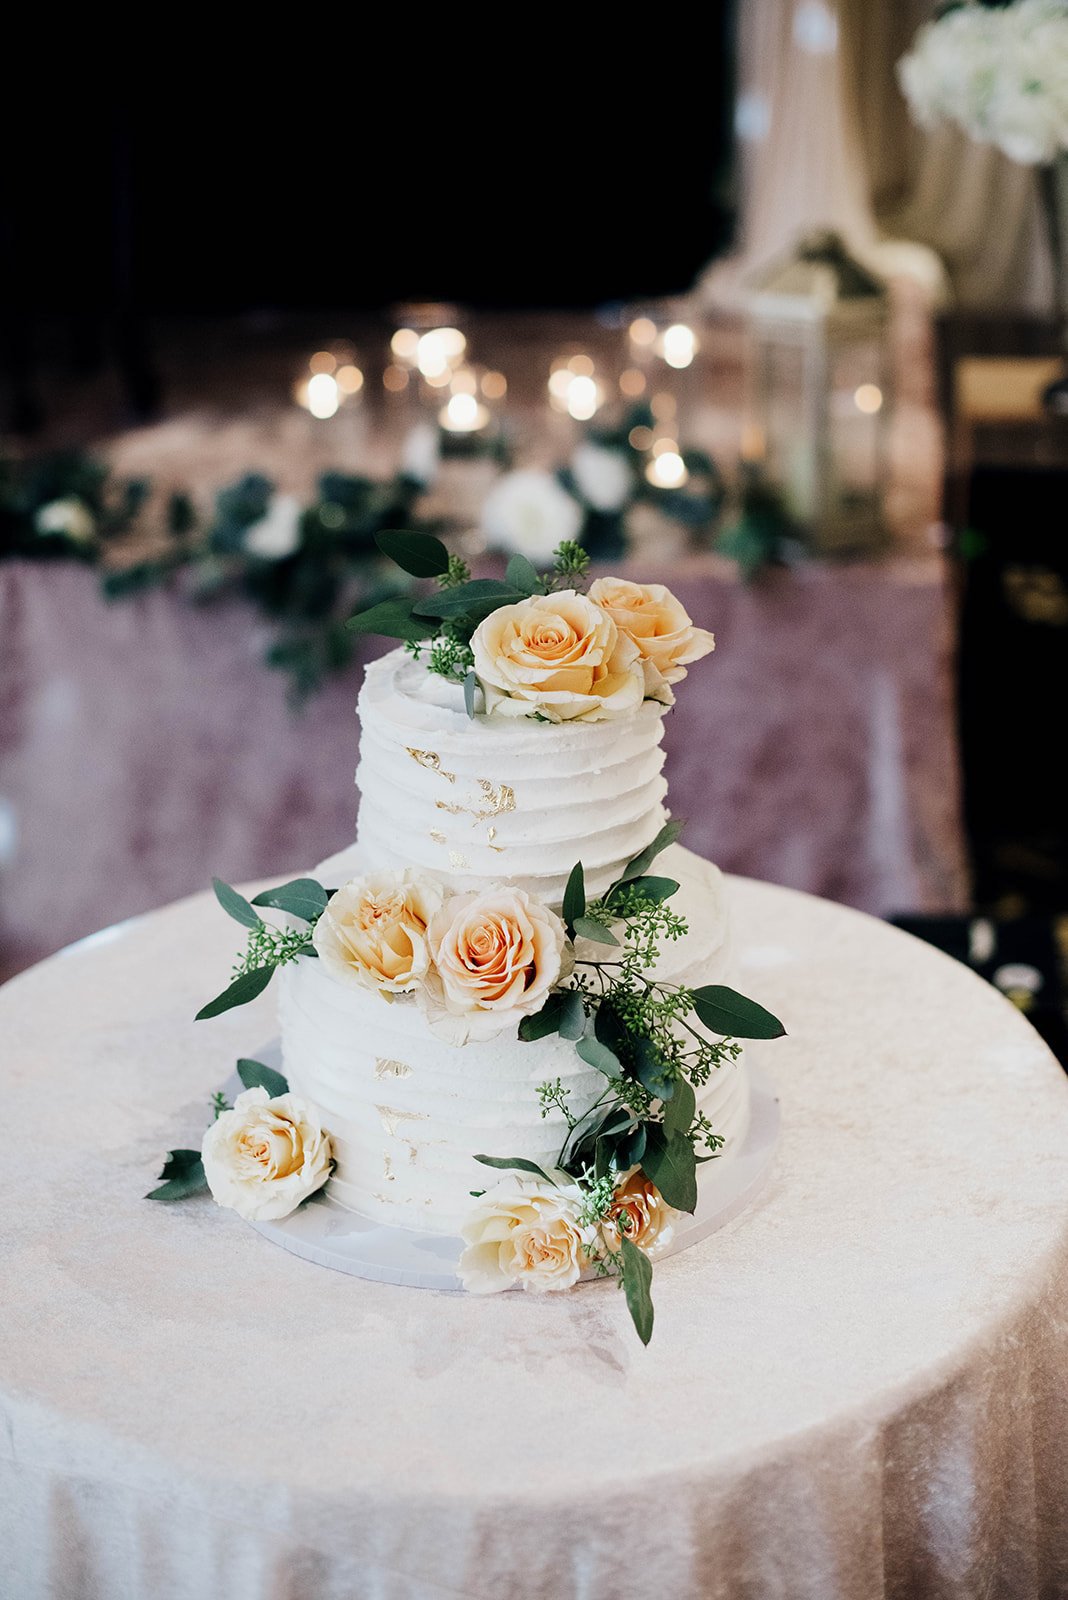 An elegant white frosted wedding cake with yellow flowers and green leaves rests on a table.